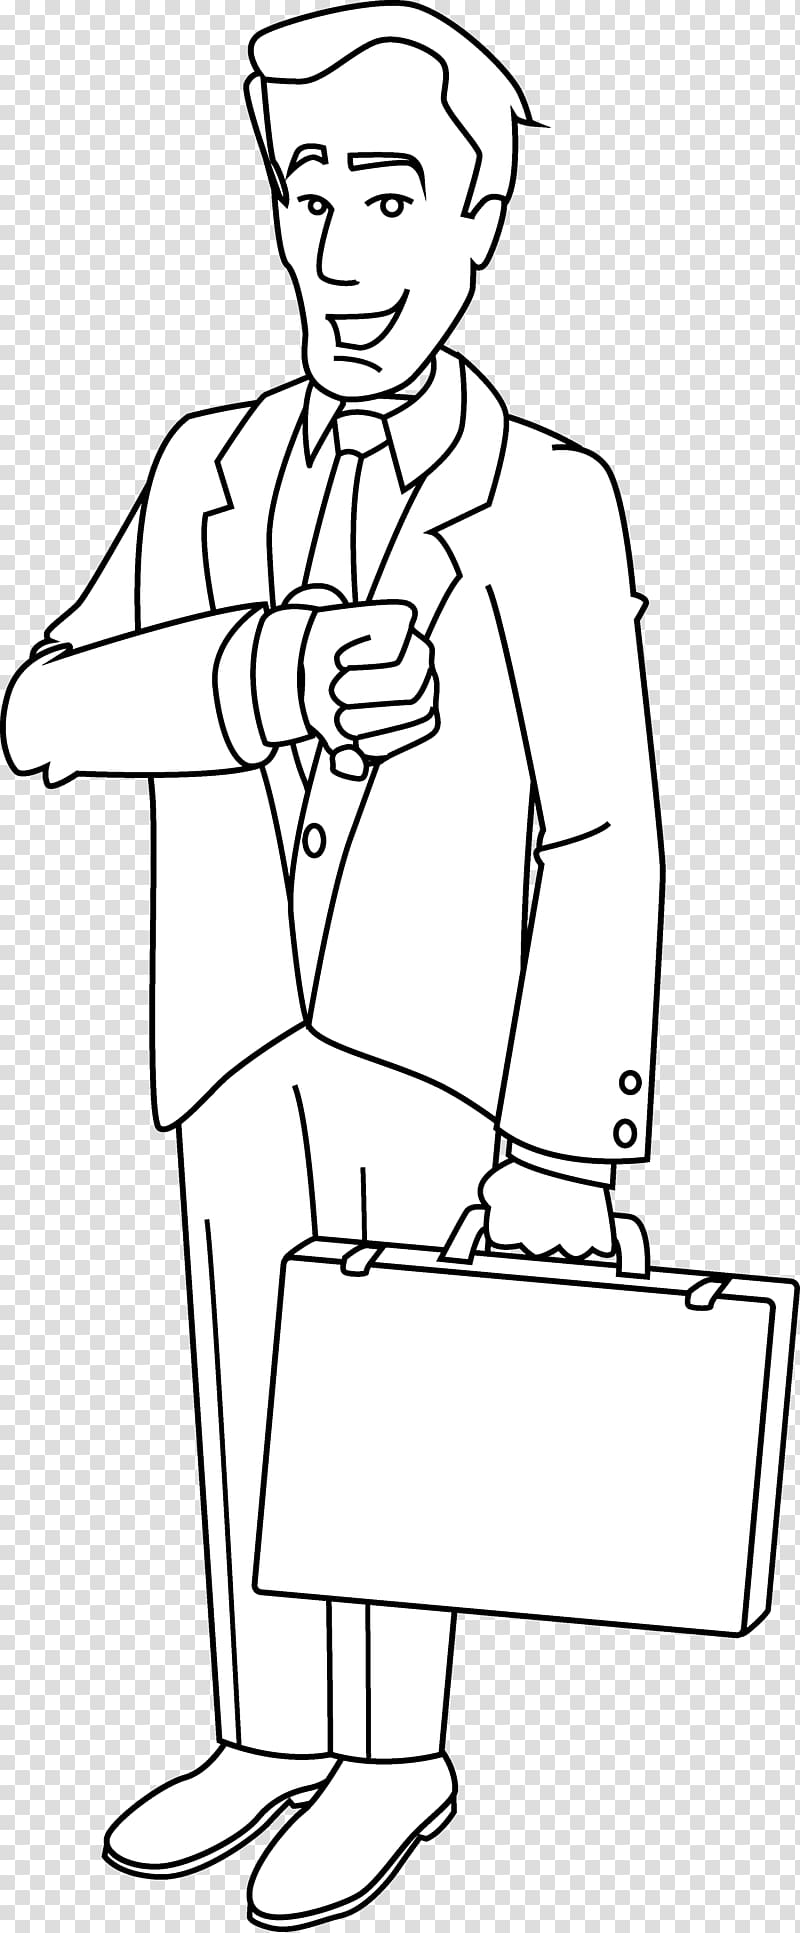 Businessperson Coloring book , Buisness transparent background PNG ...